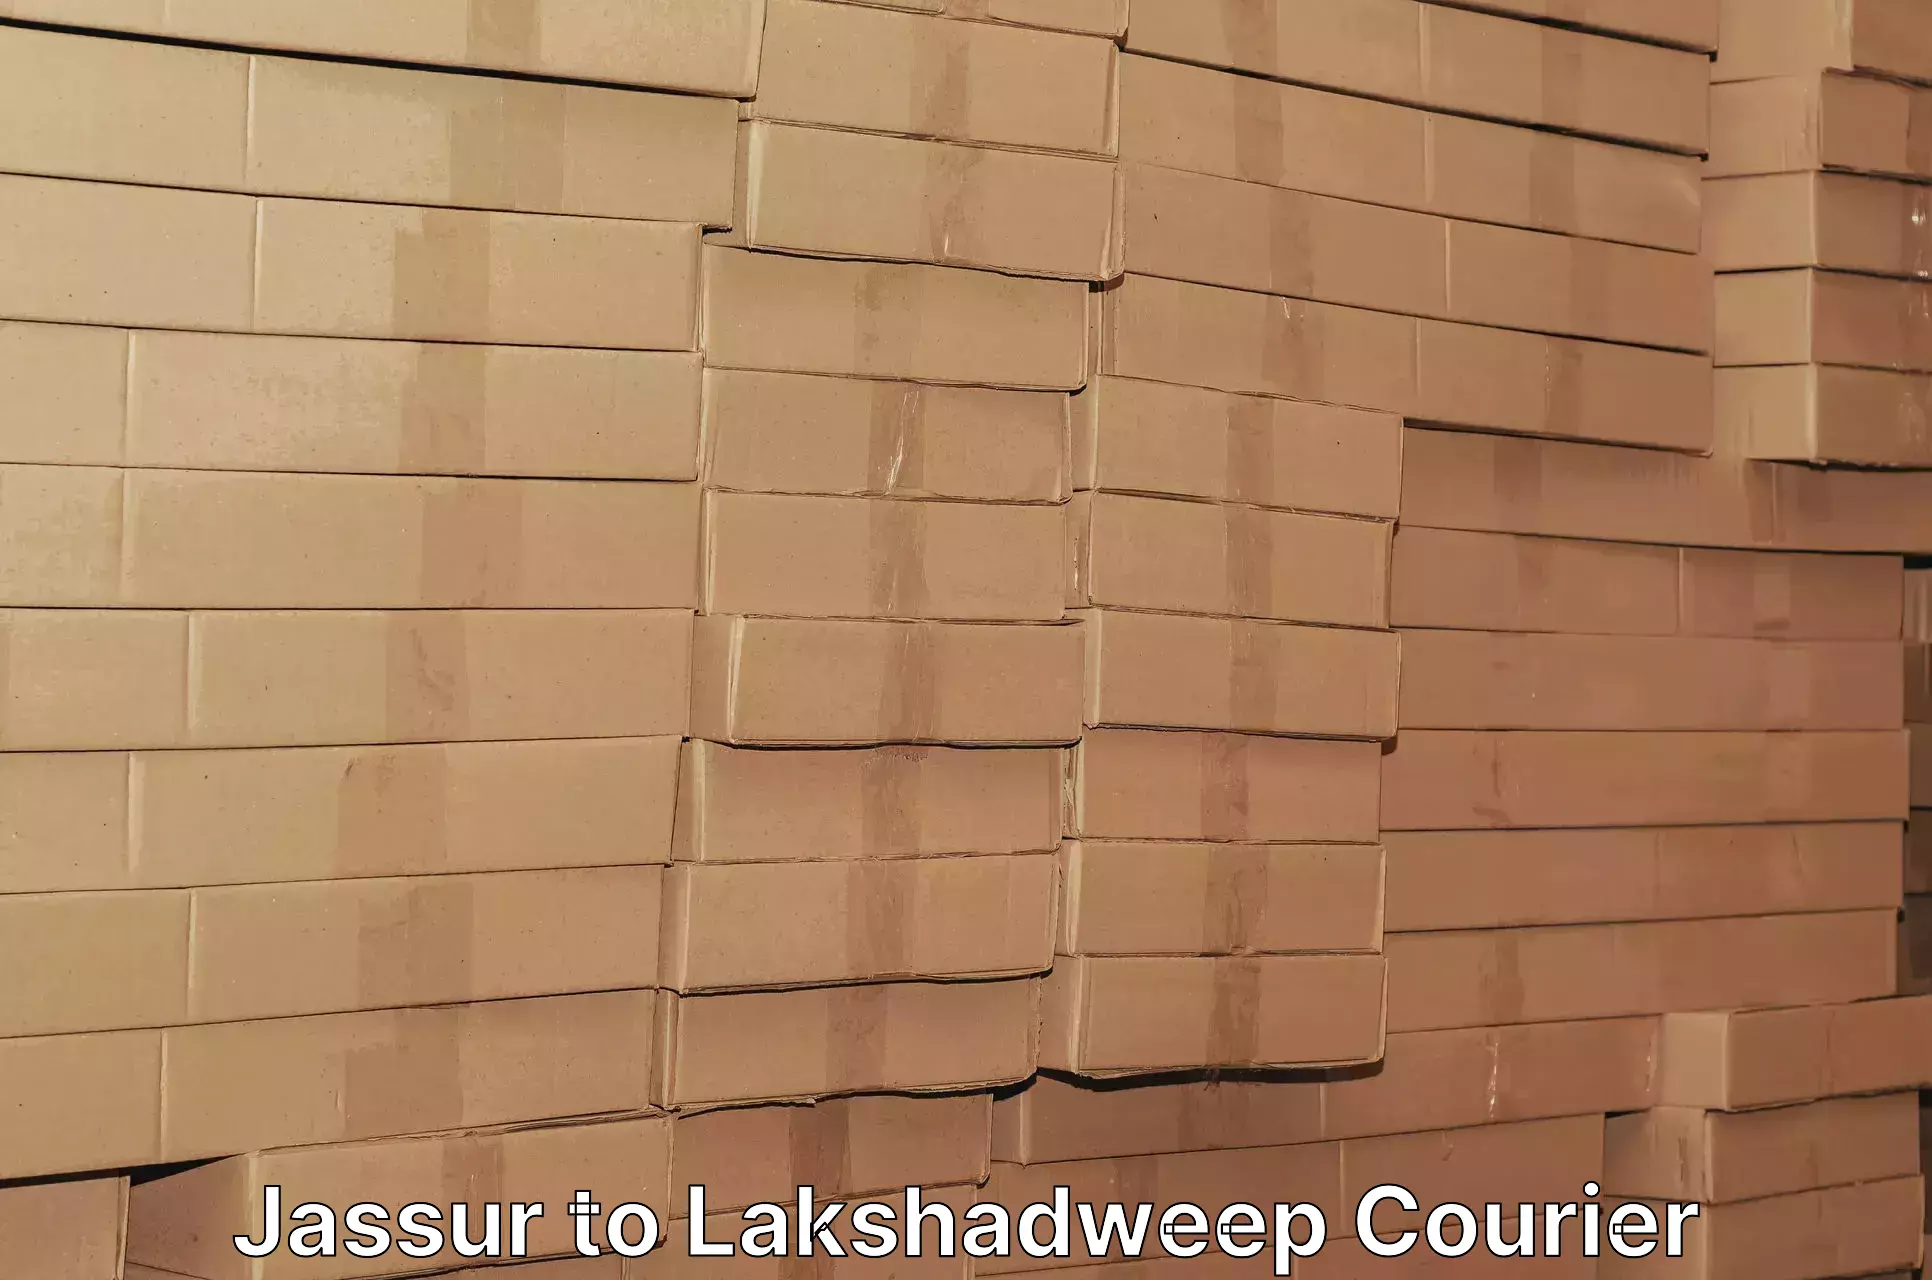 Expedited shipping solutions Jassur to Lakshadweep